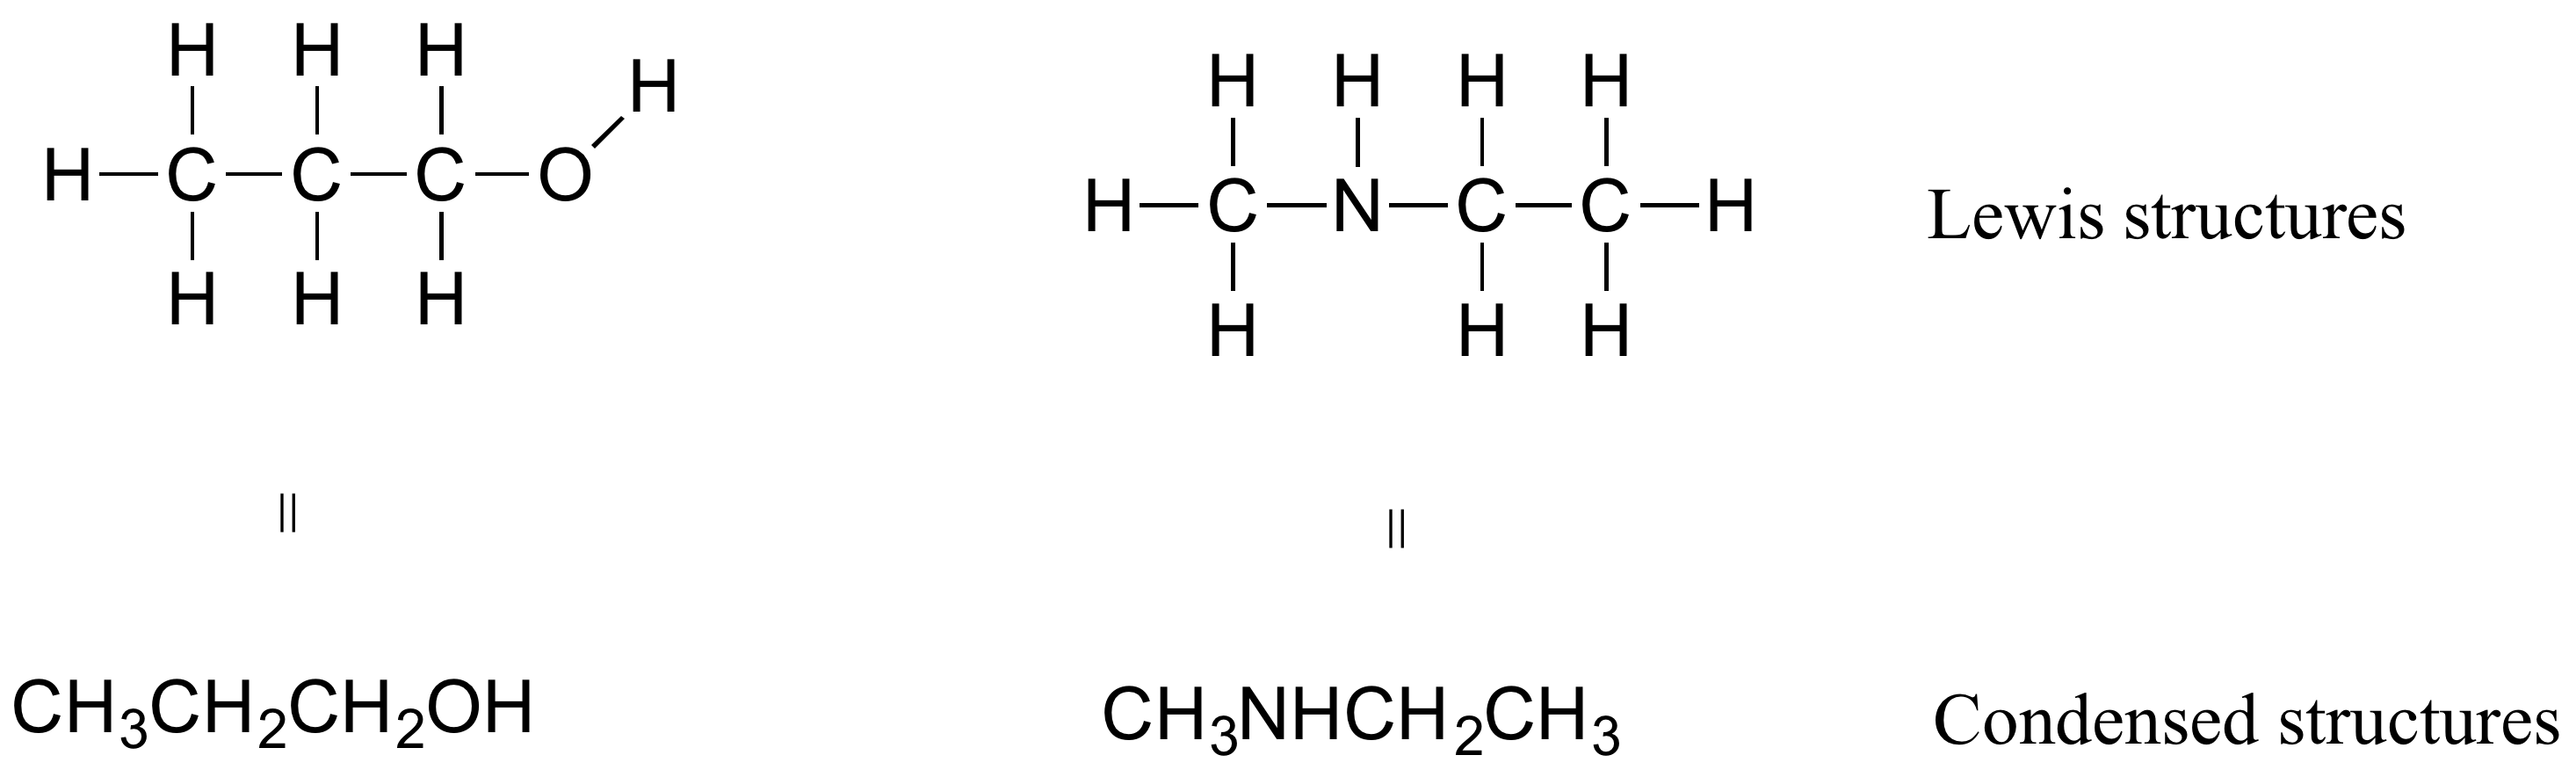 Two examples showing how structural formulas can be condensed are given. The first is a 3-carbon alcohol, formula C3H8O. The second is a 3 carbon amine, C3H9N. Condensed structures are written left to right without drawing bonds from C, O or N to hydrogen. The resulting condensed structures read in this fashion: CH3CH2CH2OH and CH3NHCH2CH3.